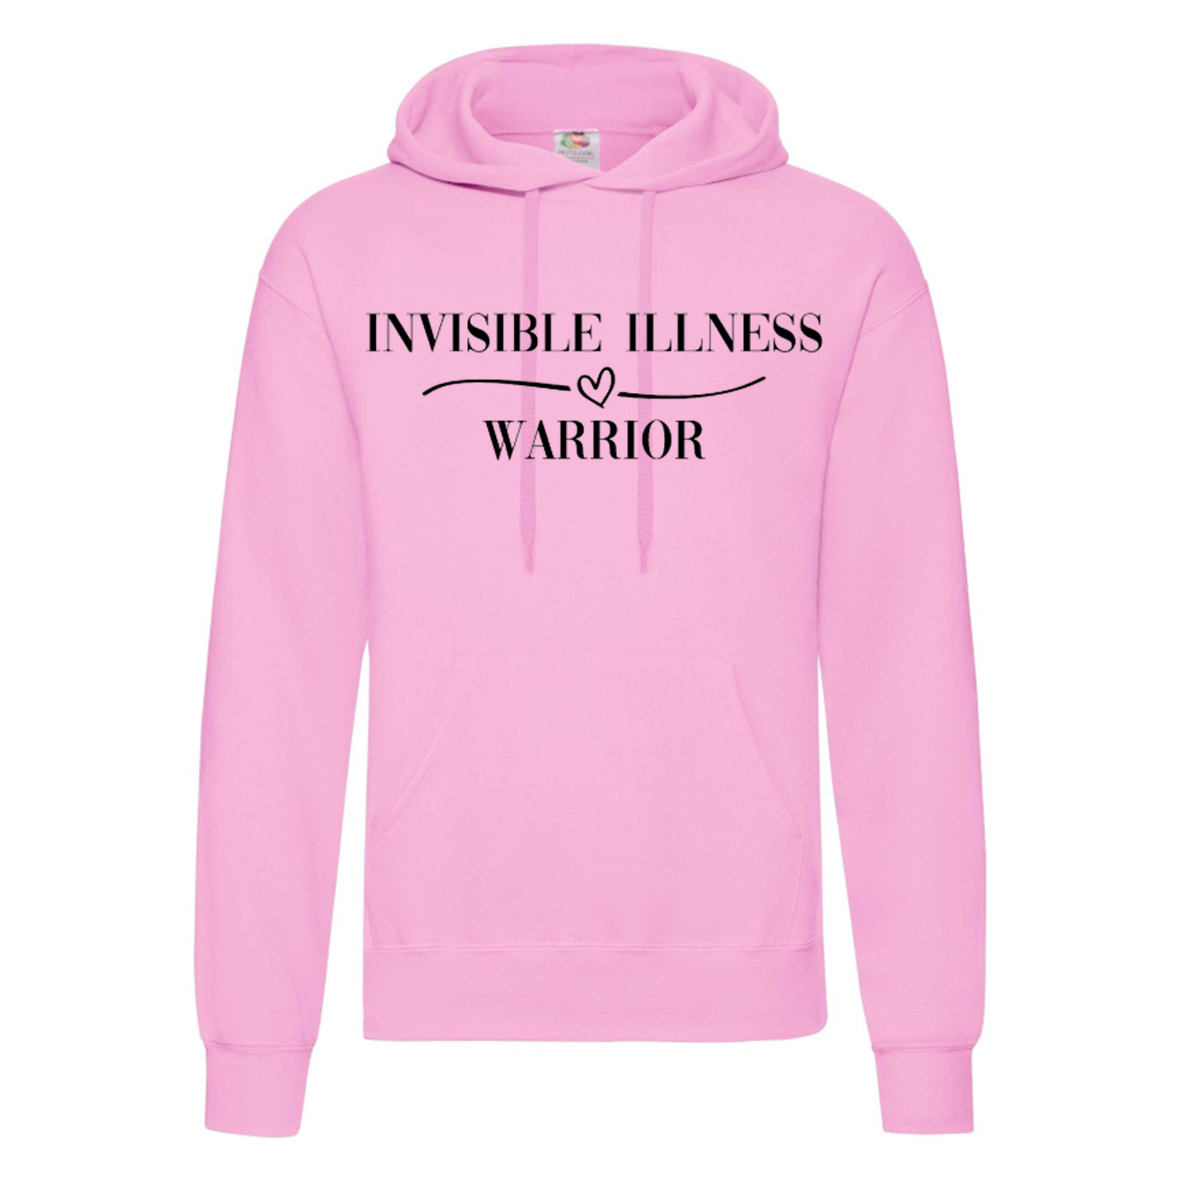 Invisible Illness Warrior Hoodie